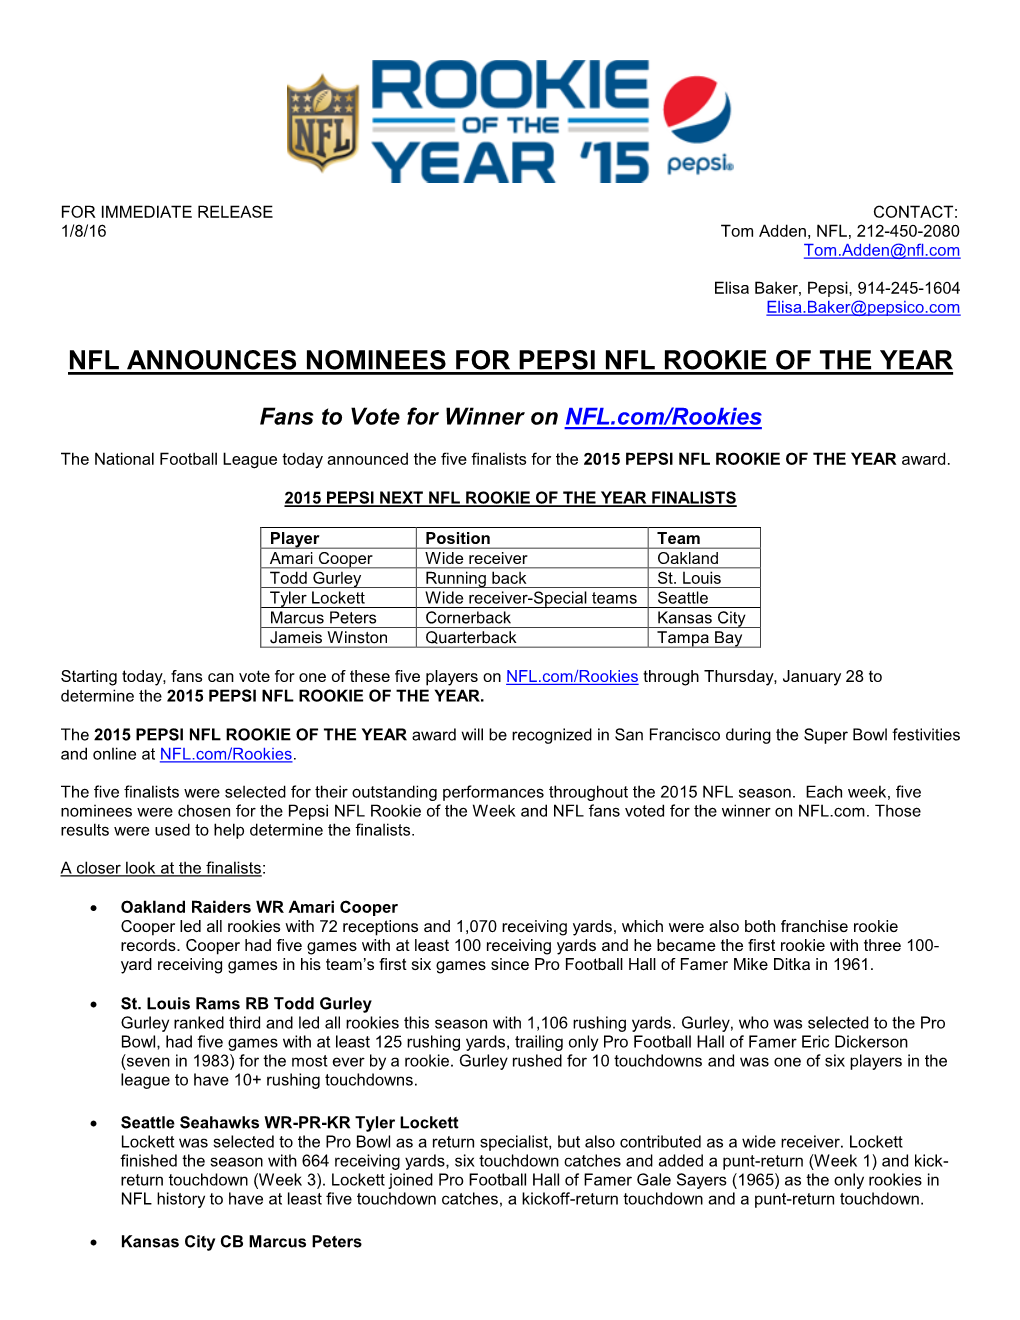 Nfl Announces Nominees for Pepsi Nfl Rookie of the Year